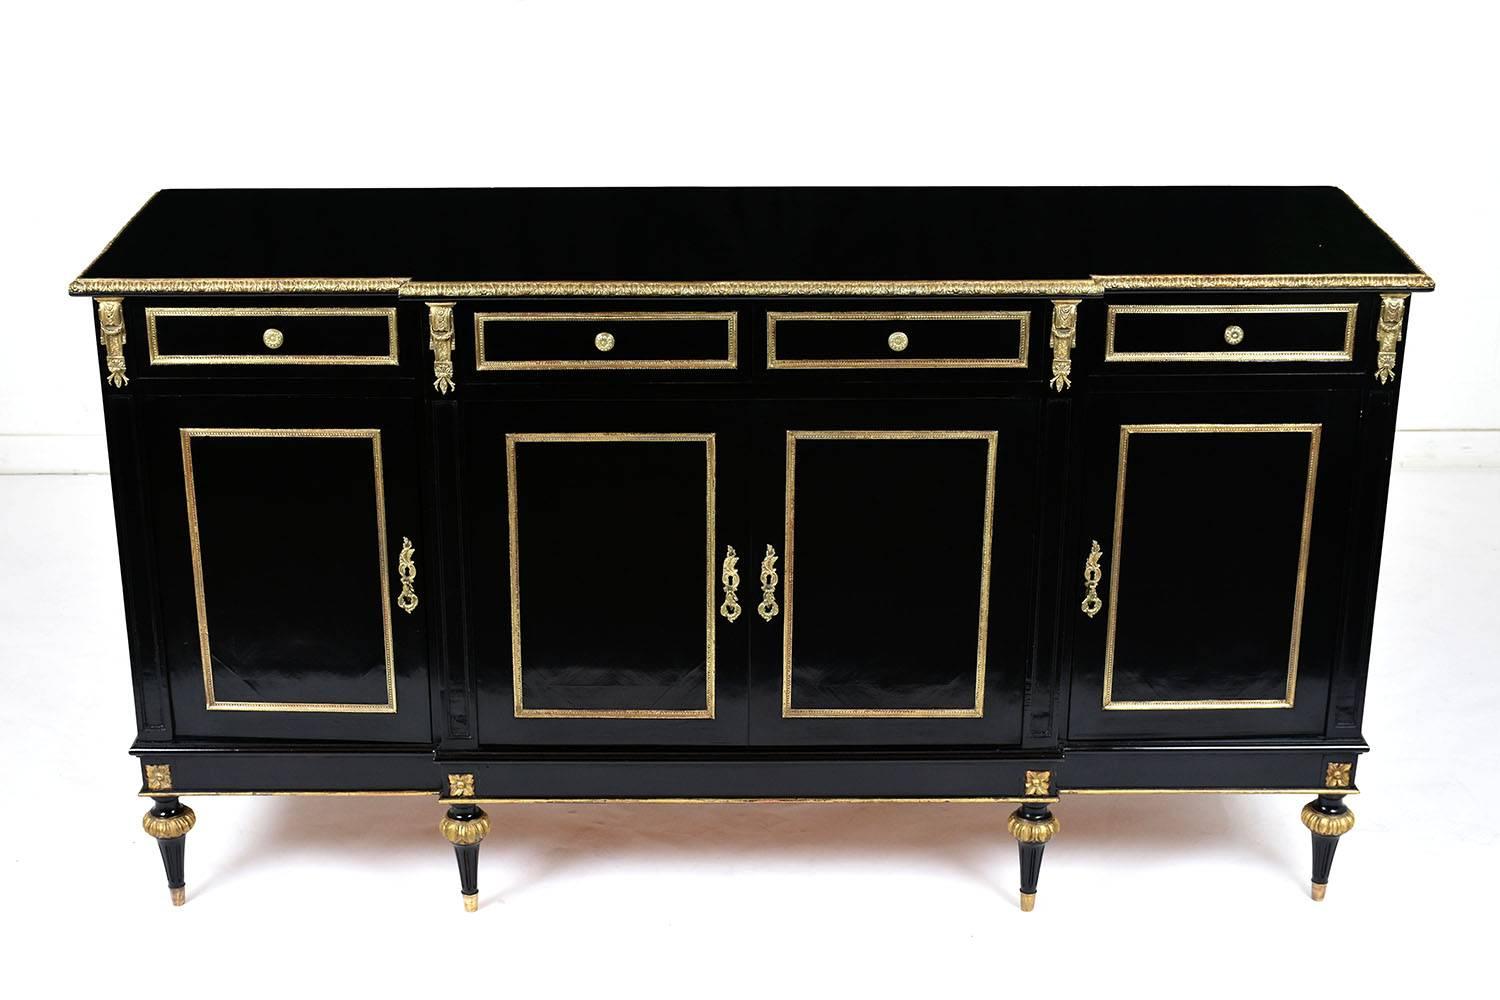 This 1970's Louis XVI-style buffet is made of mahogany wood ebonized a deep black color with a lacquered finish. The wood top features a beveled edge with brass moulding accents. There are four drawers with brass moulding accents and decorative